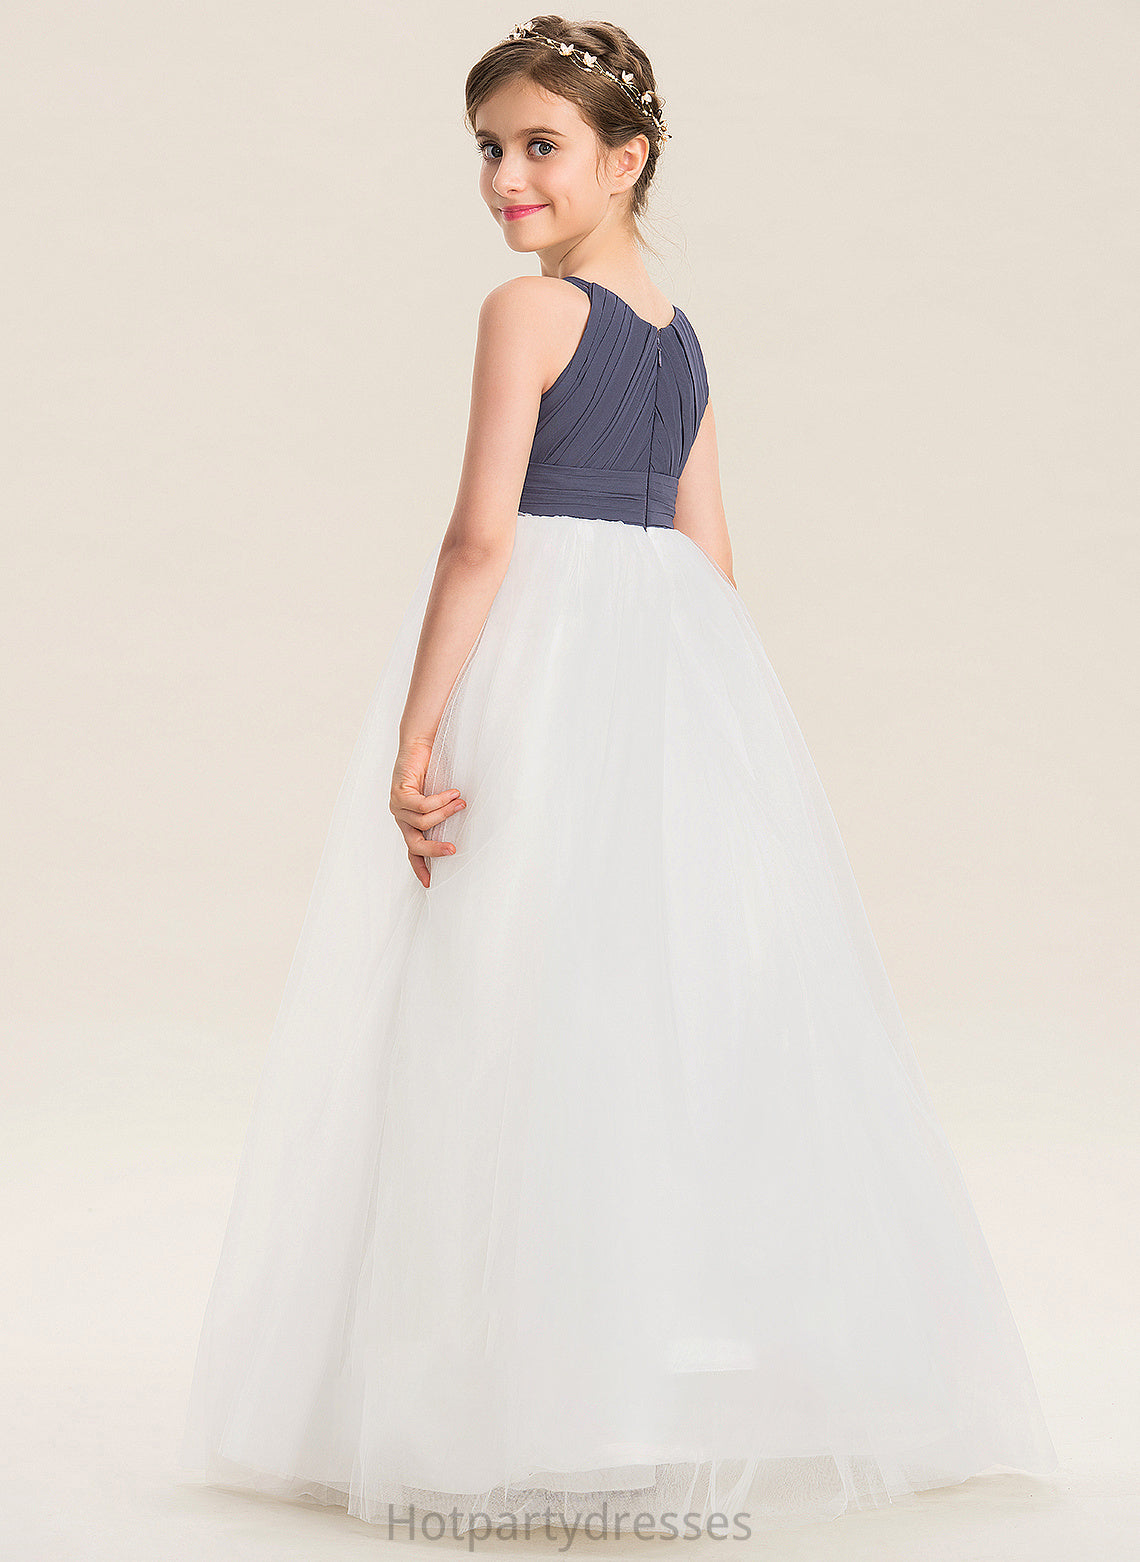 A-Line Floor-Length With Ruffle Scoop Haleigh Junior Bridesmaid Dresses Neck Chiffon Tulle